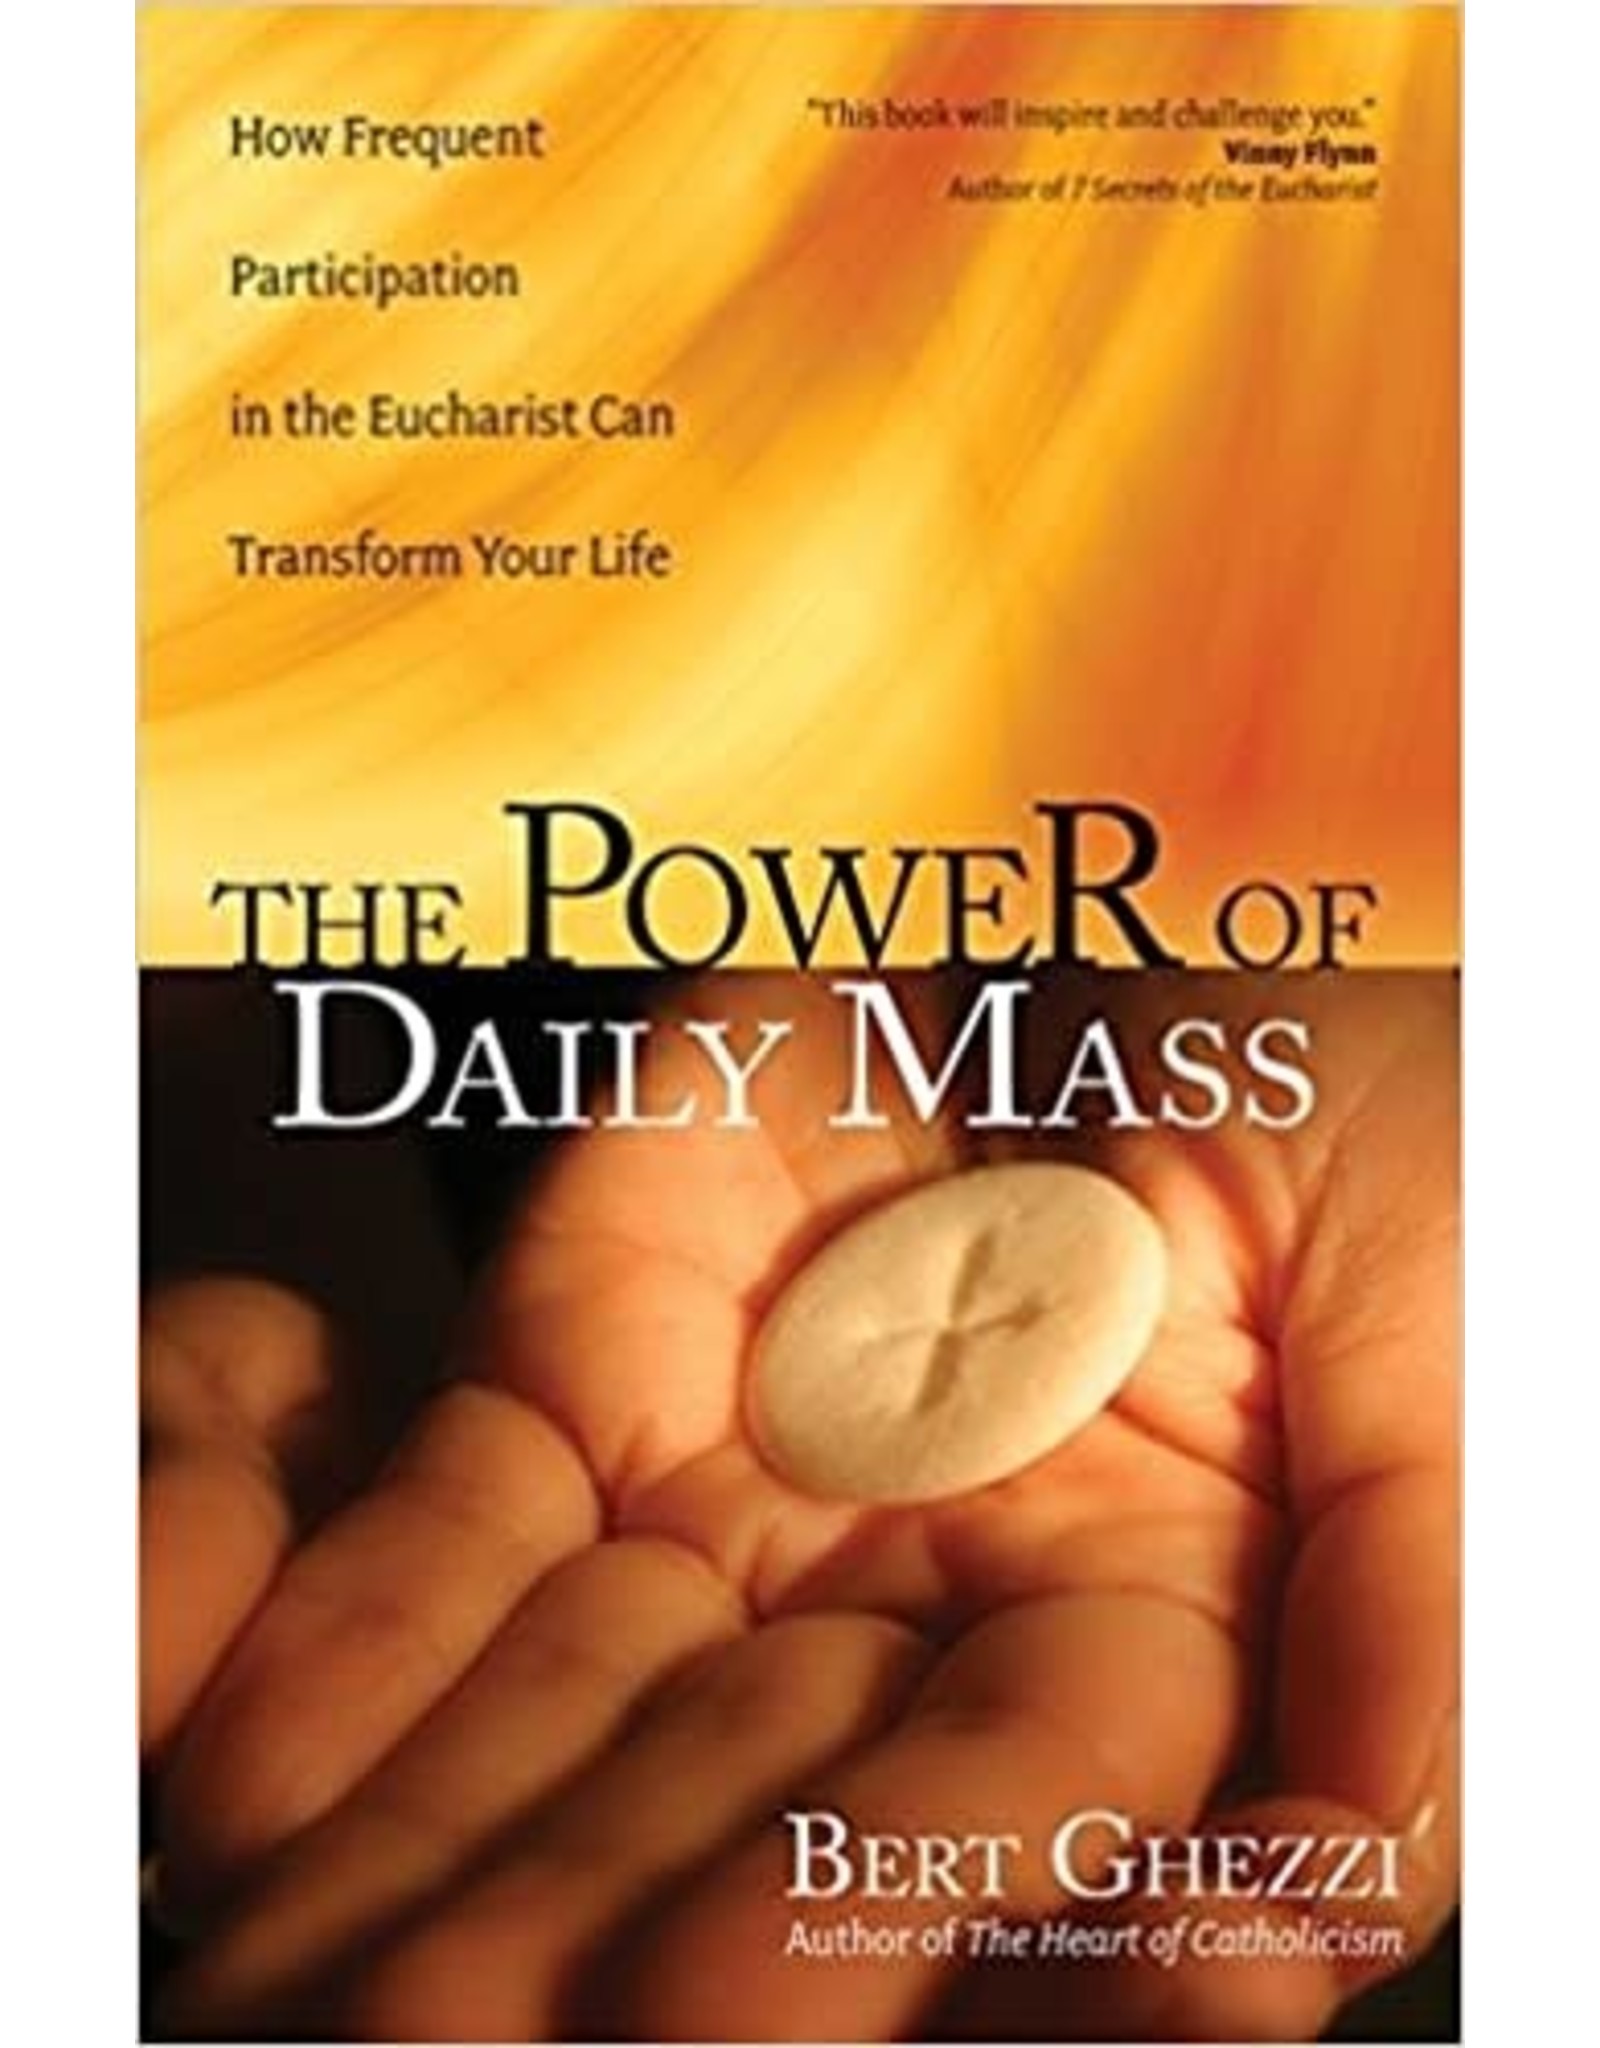 The Power of Daily Mass: How Frequent Participation in the Eucharist Can Transform Your Life